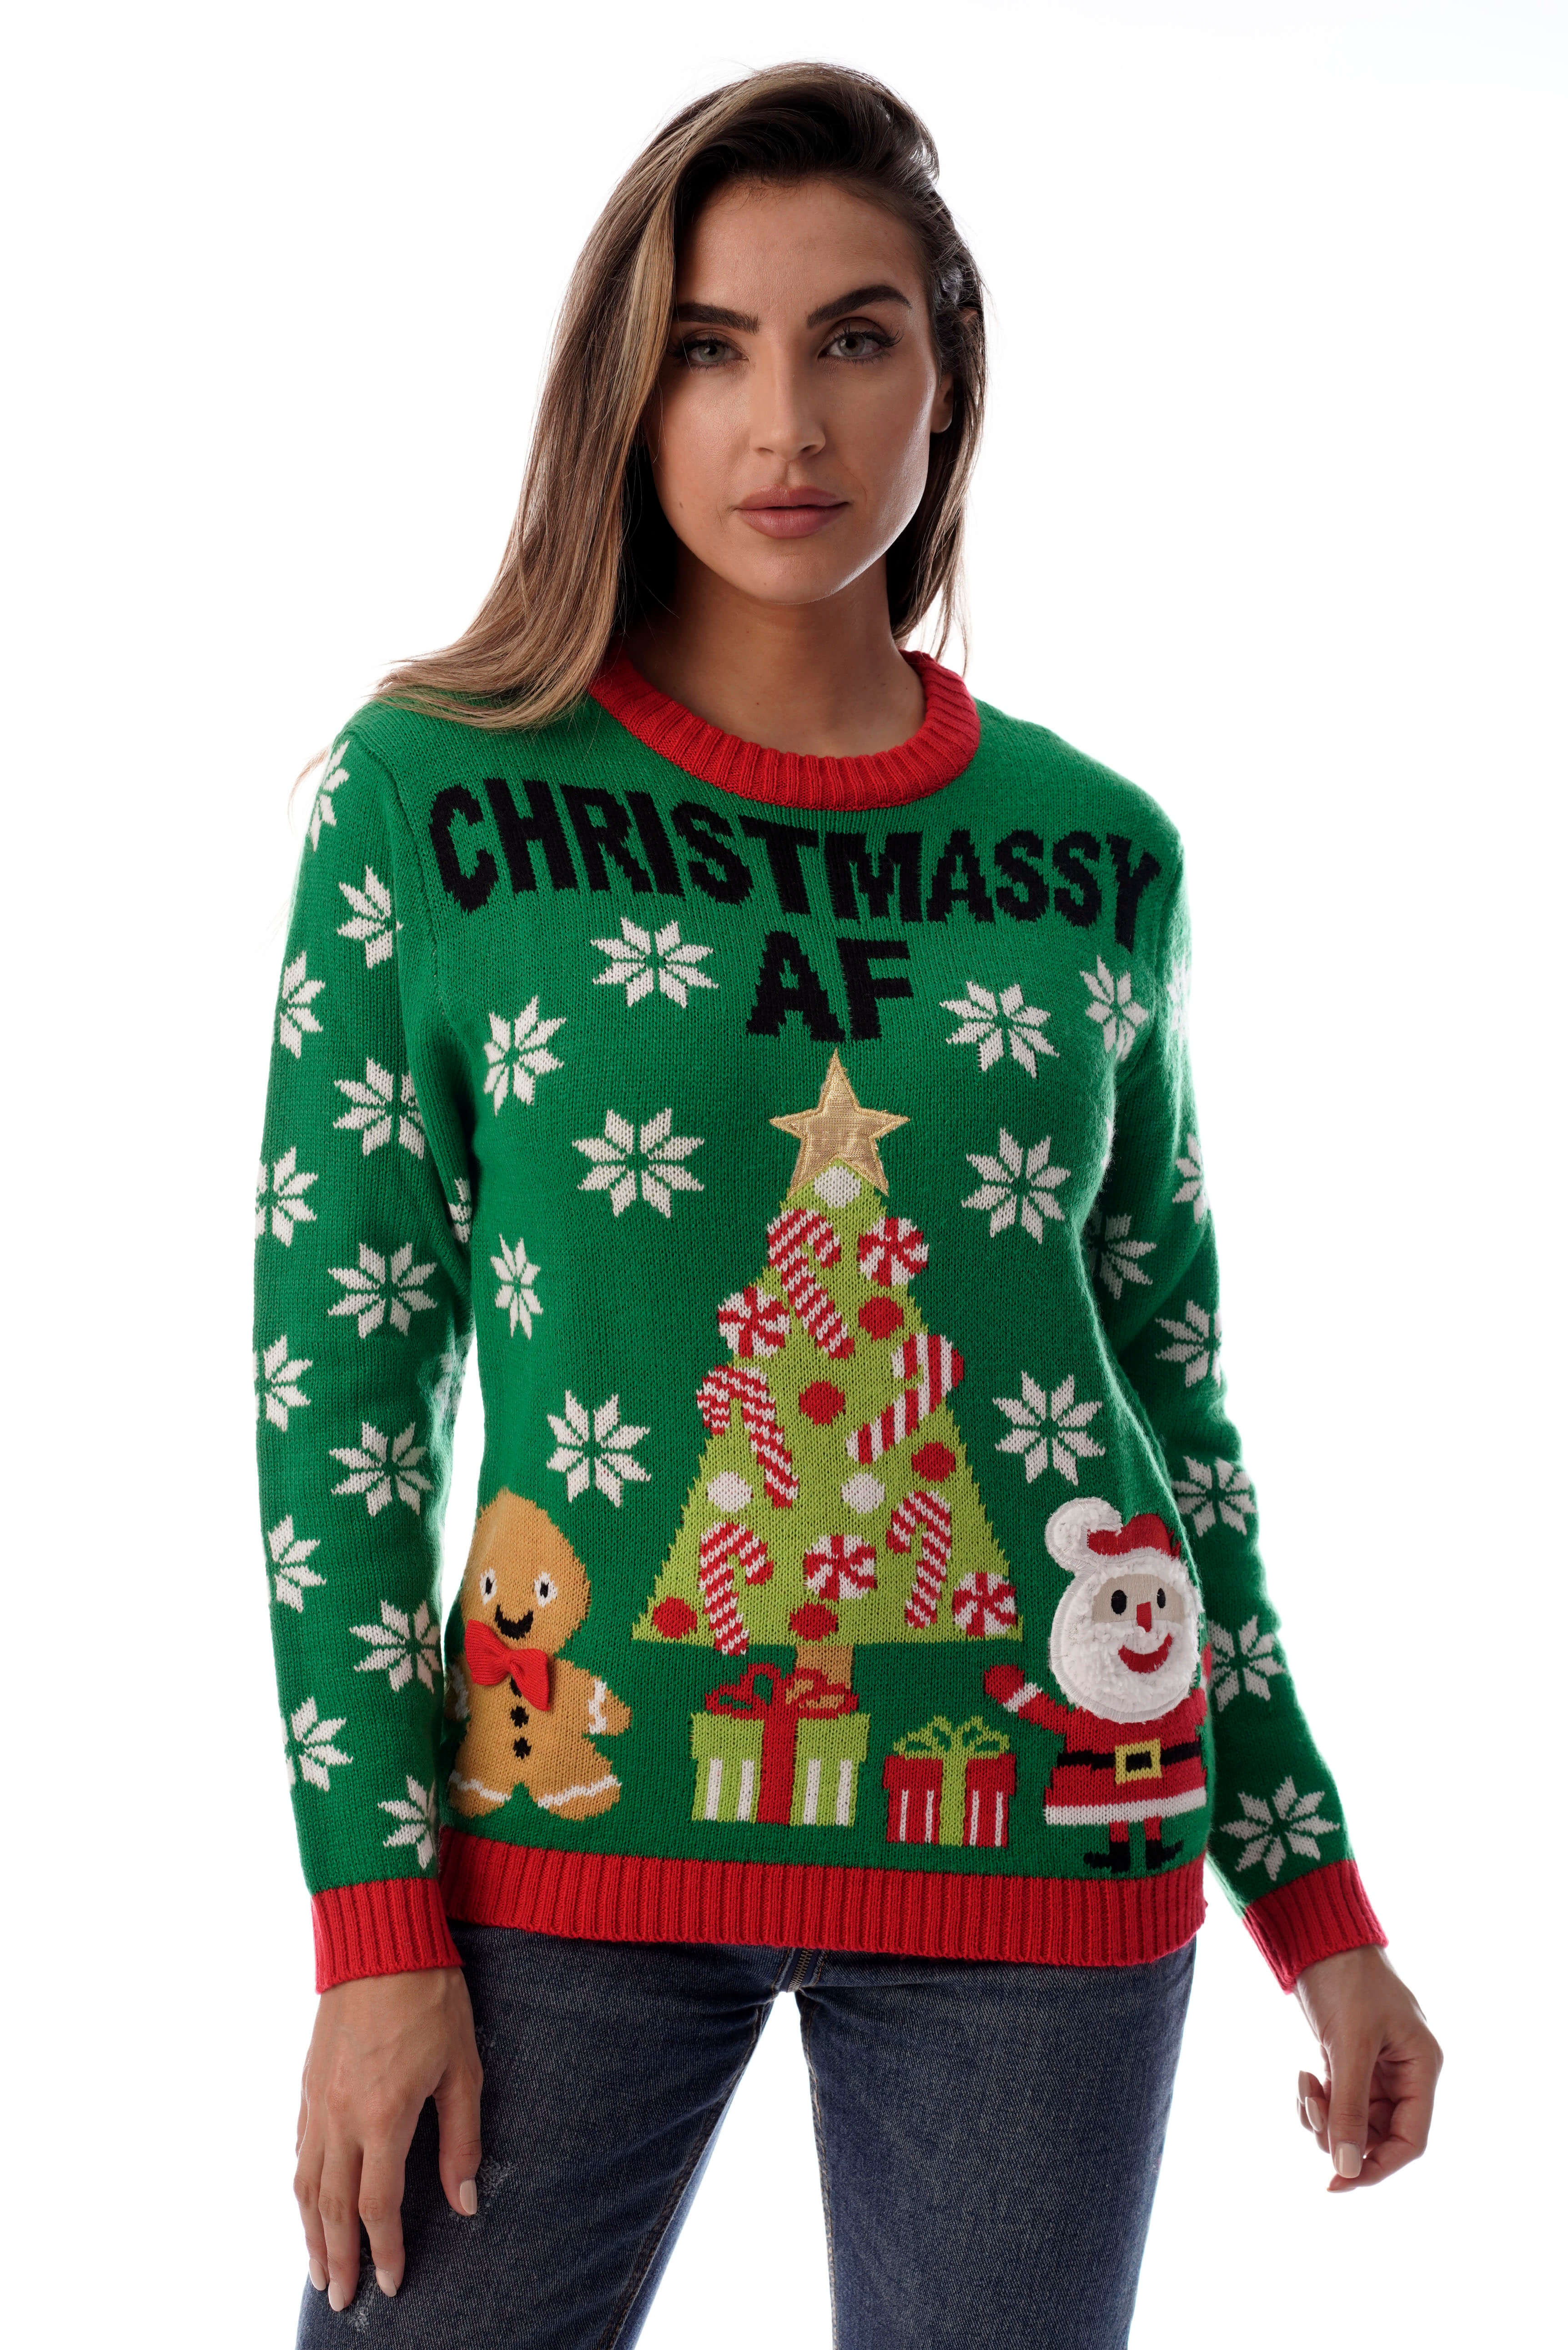 #followme Womens Ugly Christmas Sweater - Sweaters for Women (Green ...